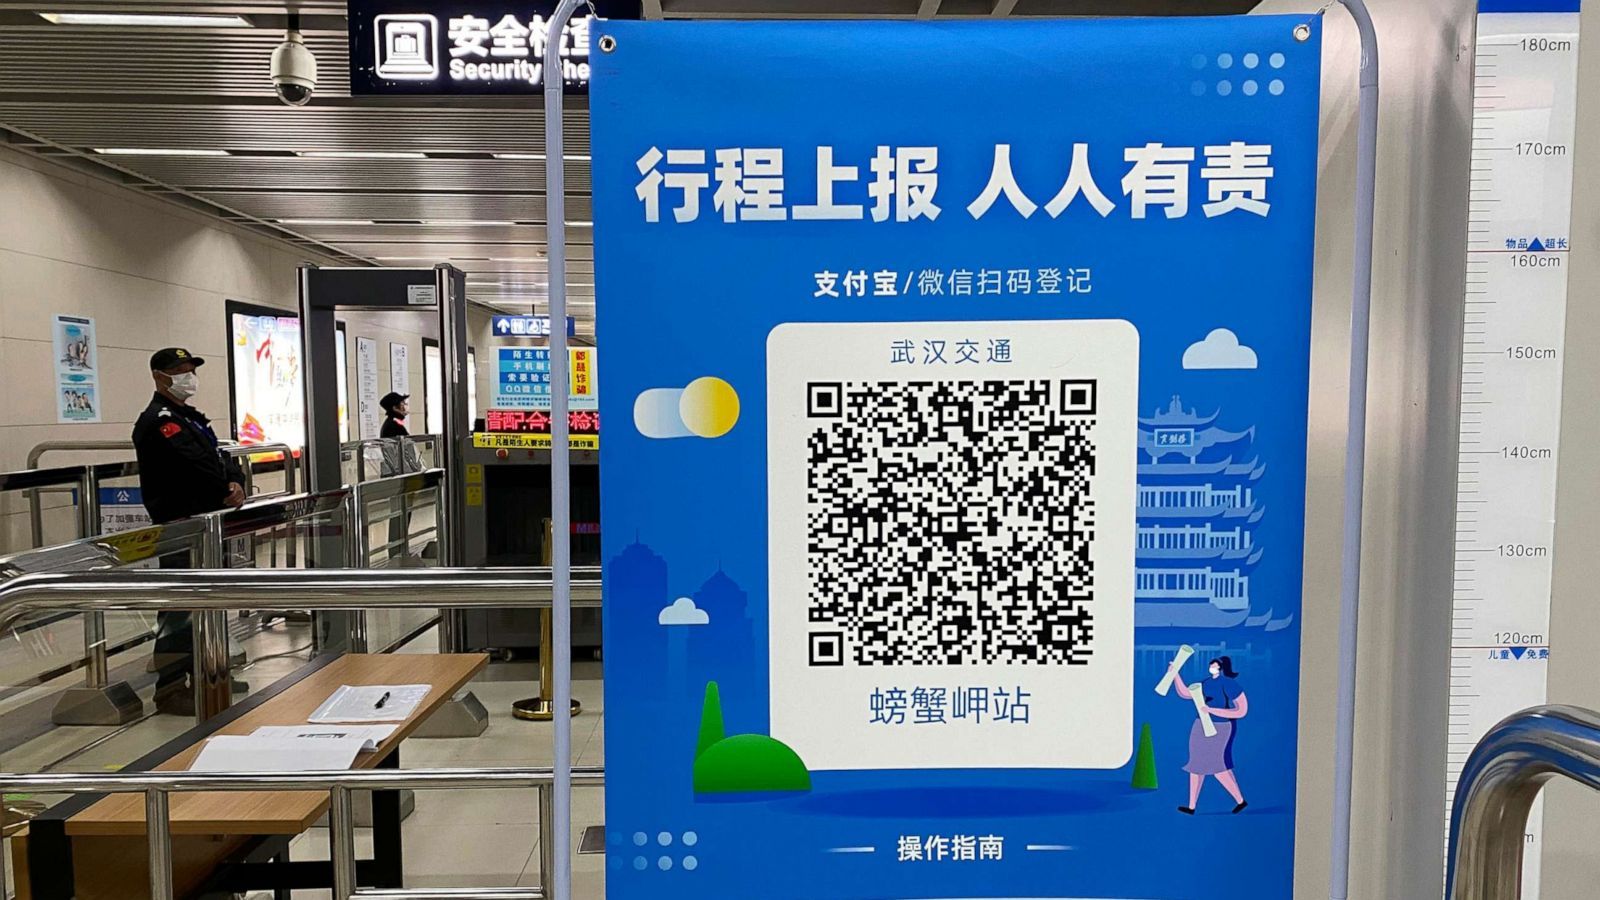 China: The QR Code System - a battle between privacy and  public interests?